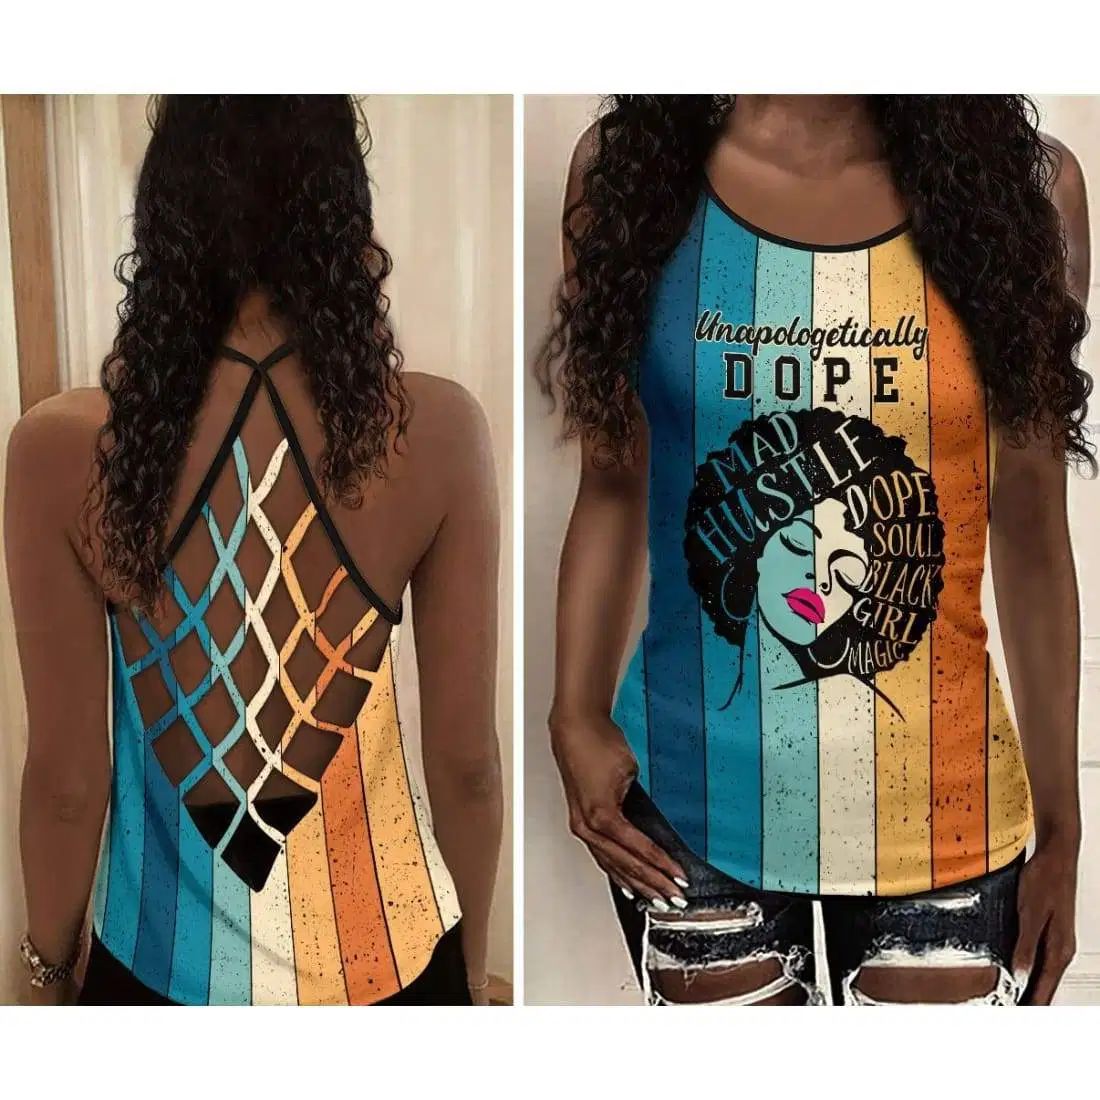 Unapologetically Dope Mad Soul Black Girl Magic Criss Cross Tank Top Style: Criss Cross Tank Top, Color: Black